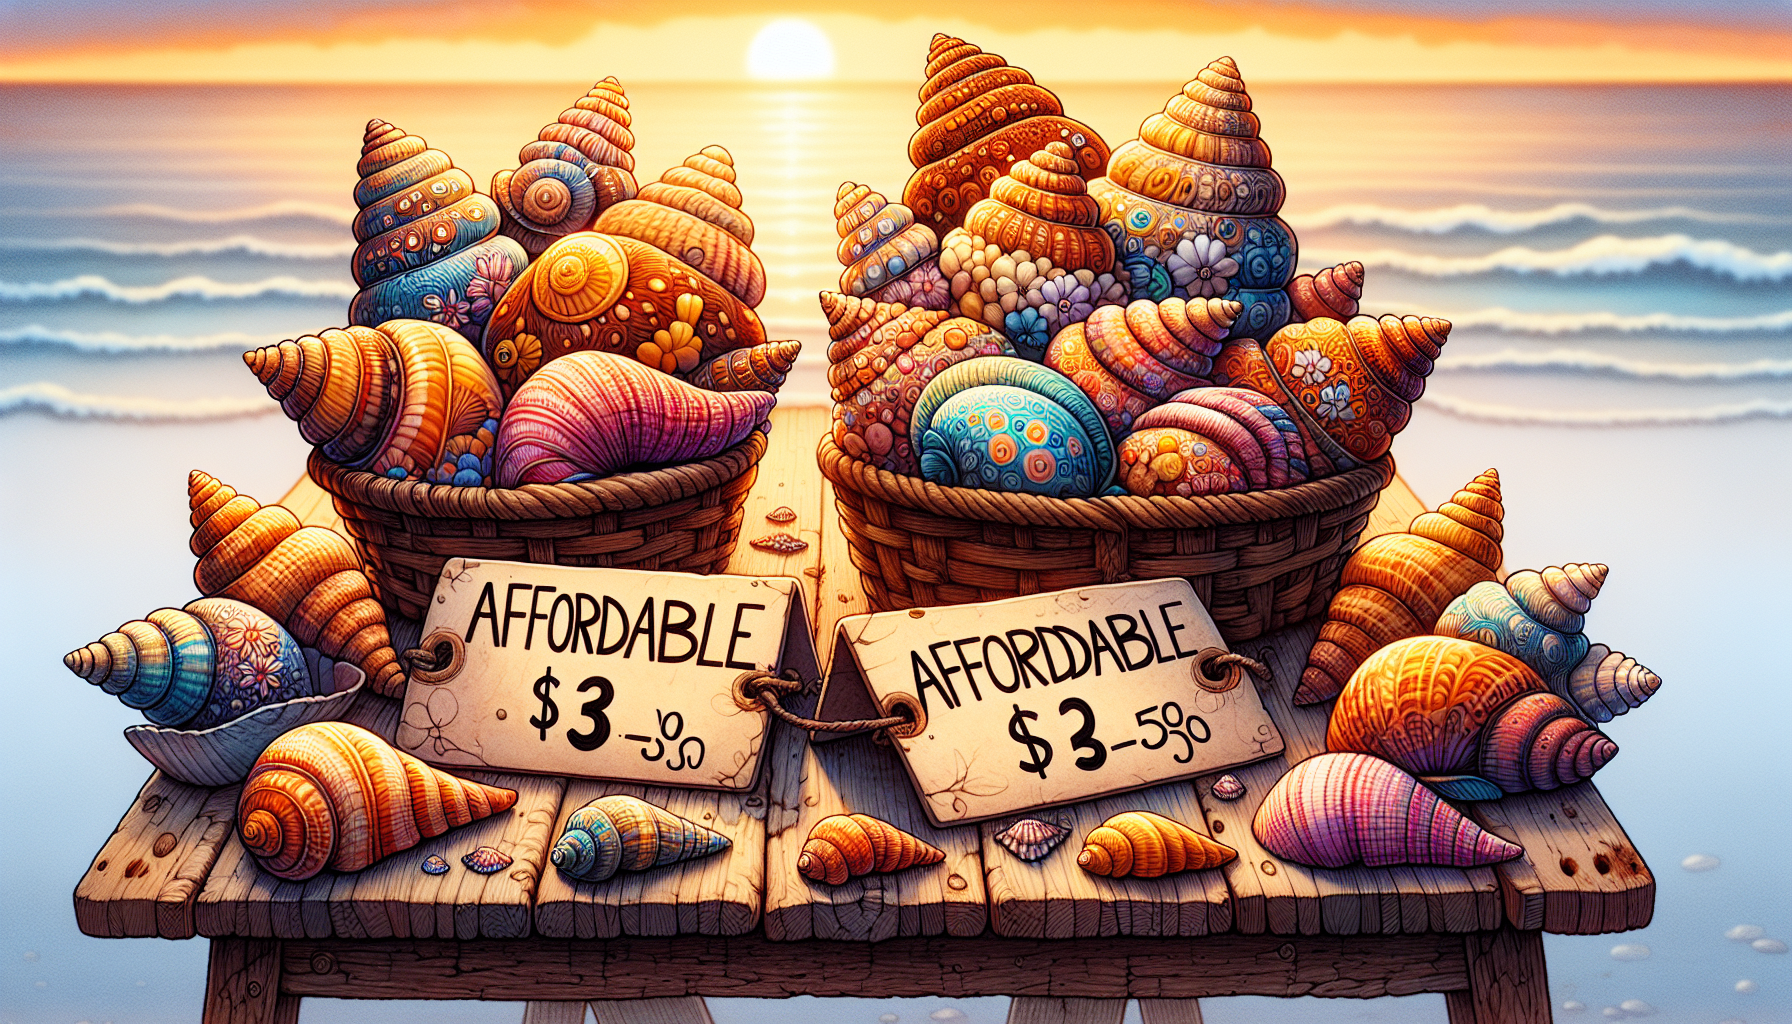 Large Sea Shells Wholesale | Whimsical illustration of affordable large seashells with price tags